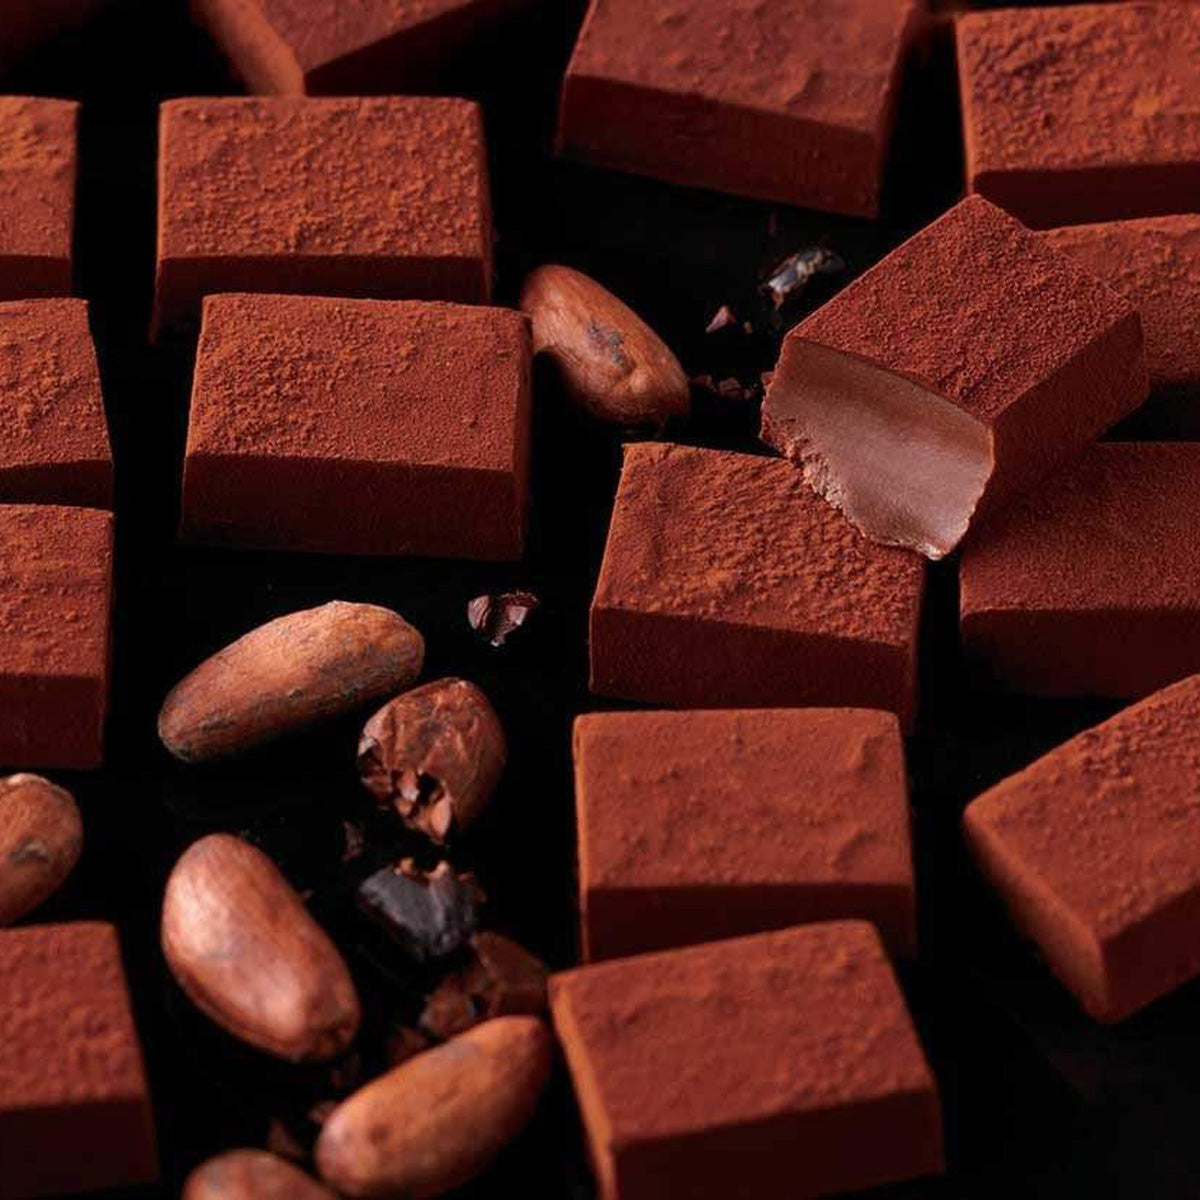 ROYCE' Chocolate - Nama Chocolate "Ghana Bitter" - Image shows brown blocks of chocolates and rounded brown cacao beans with black background.